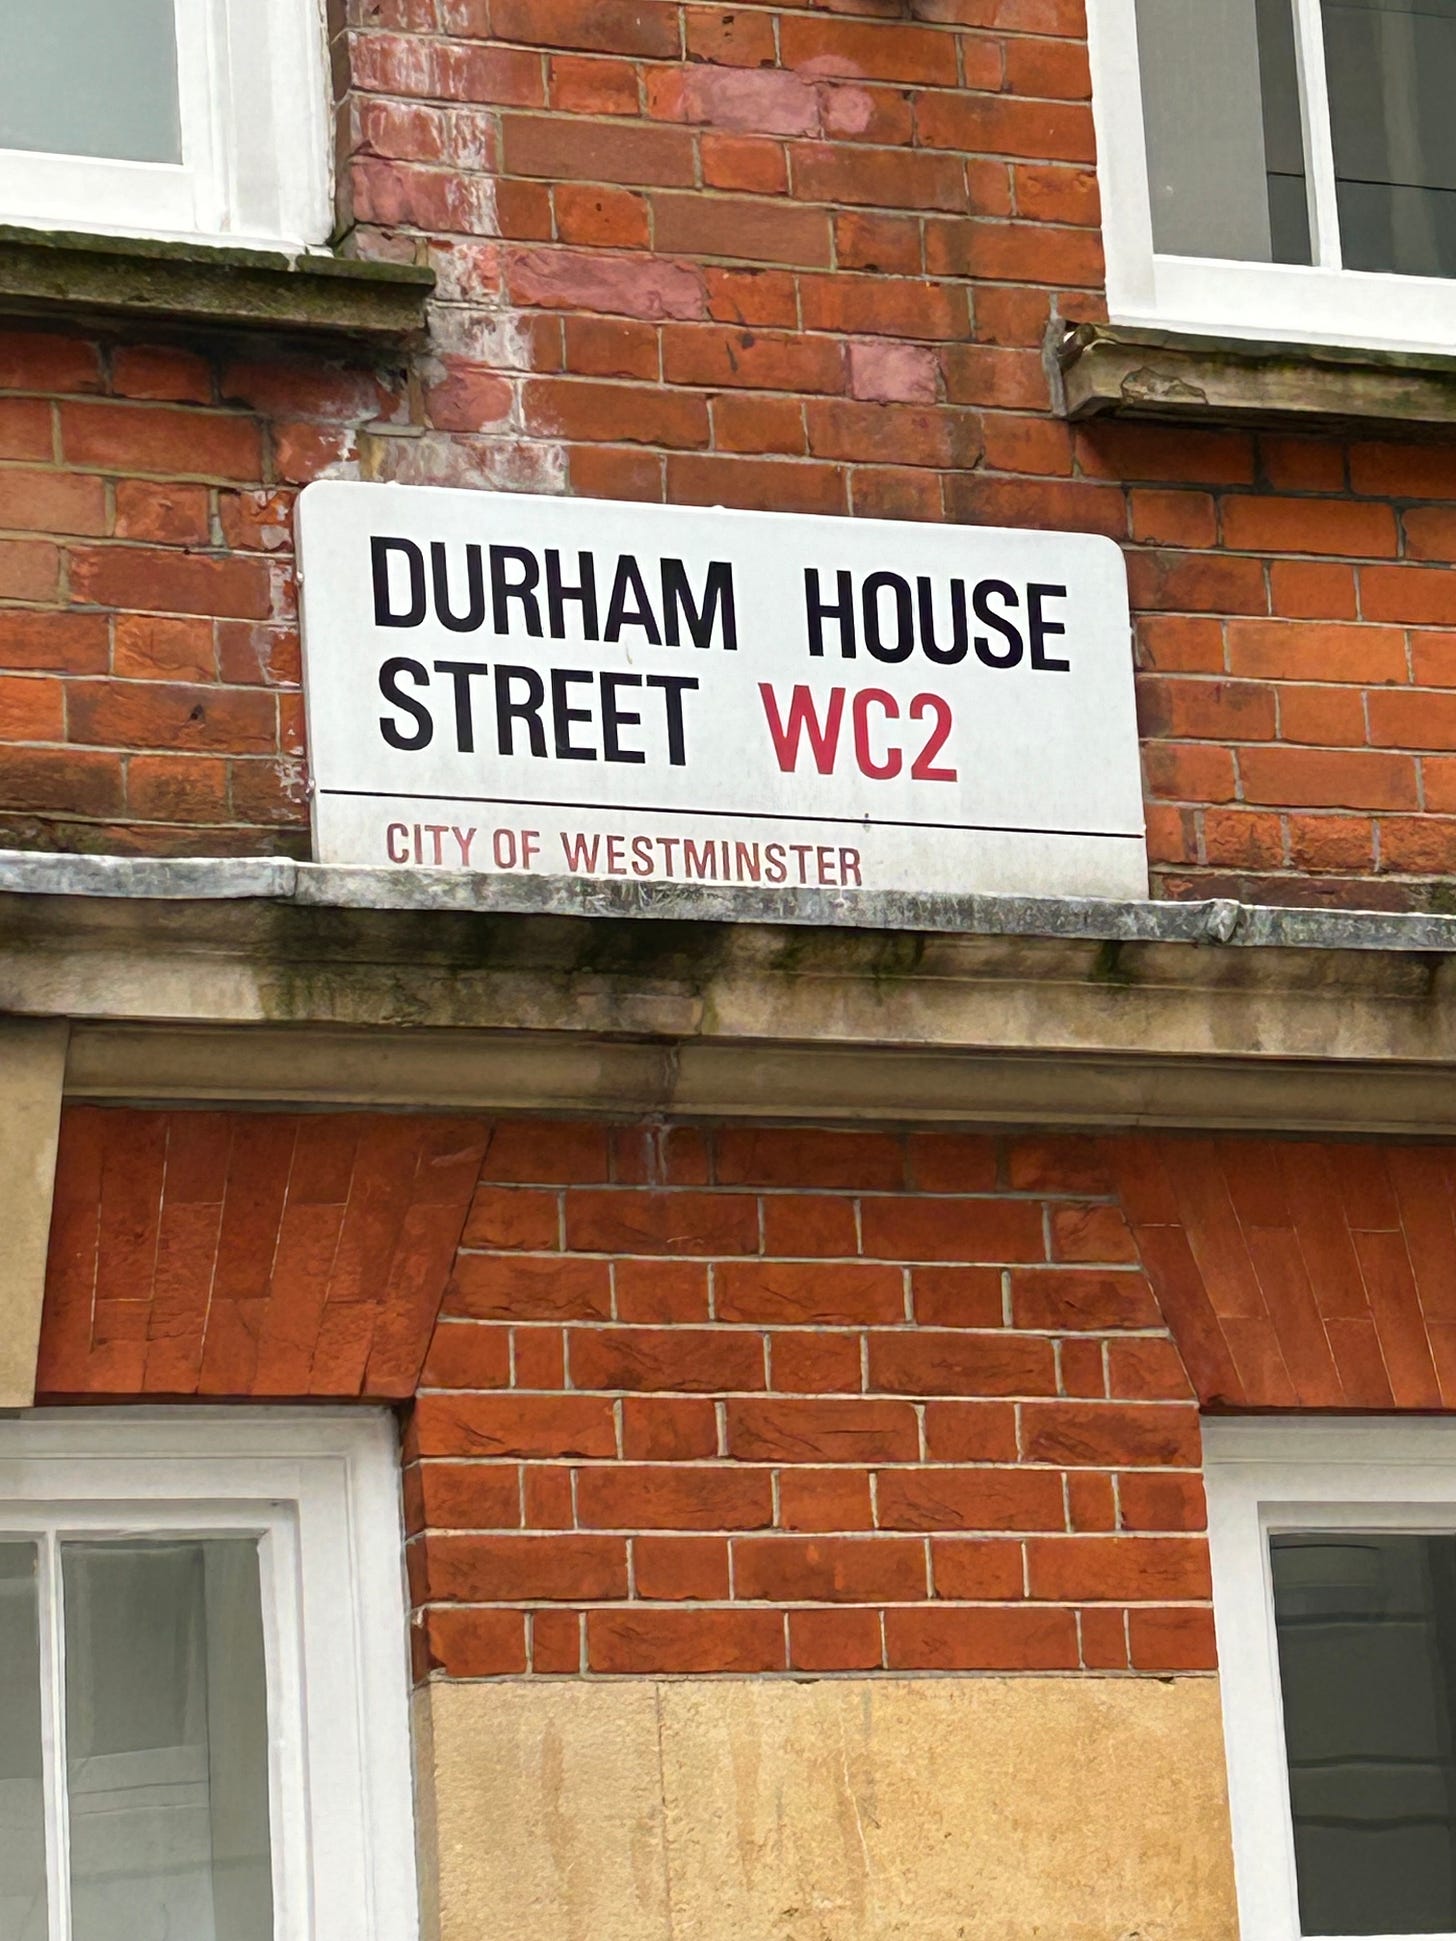 A red brick building, with a street name of Durham House Street, WC2